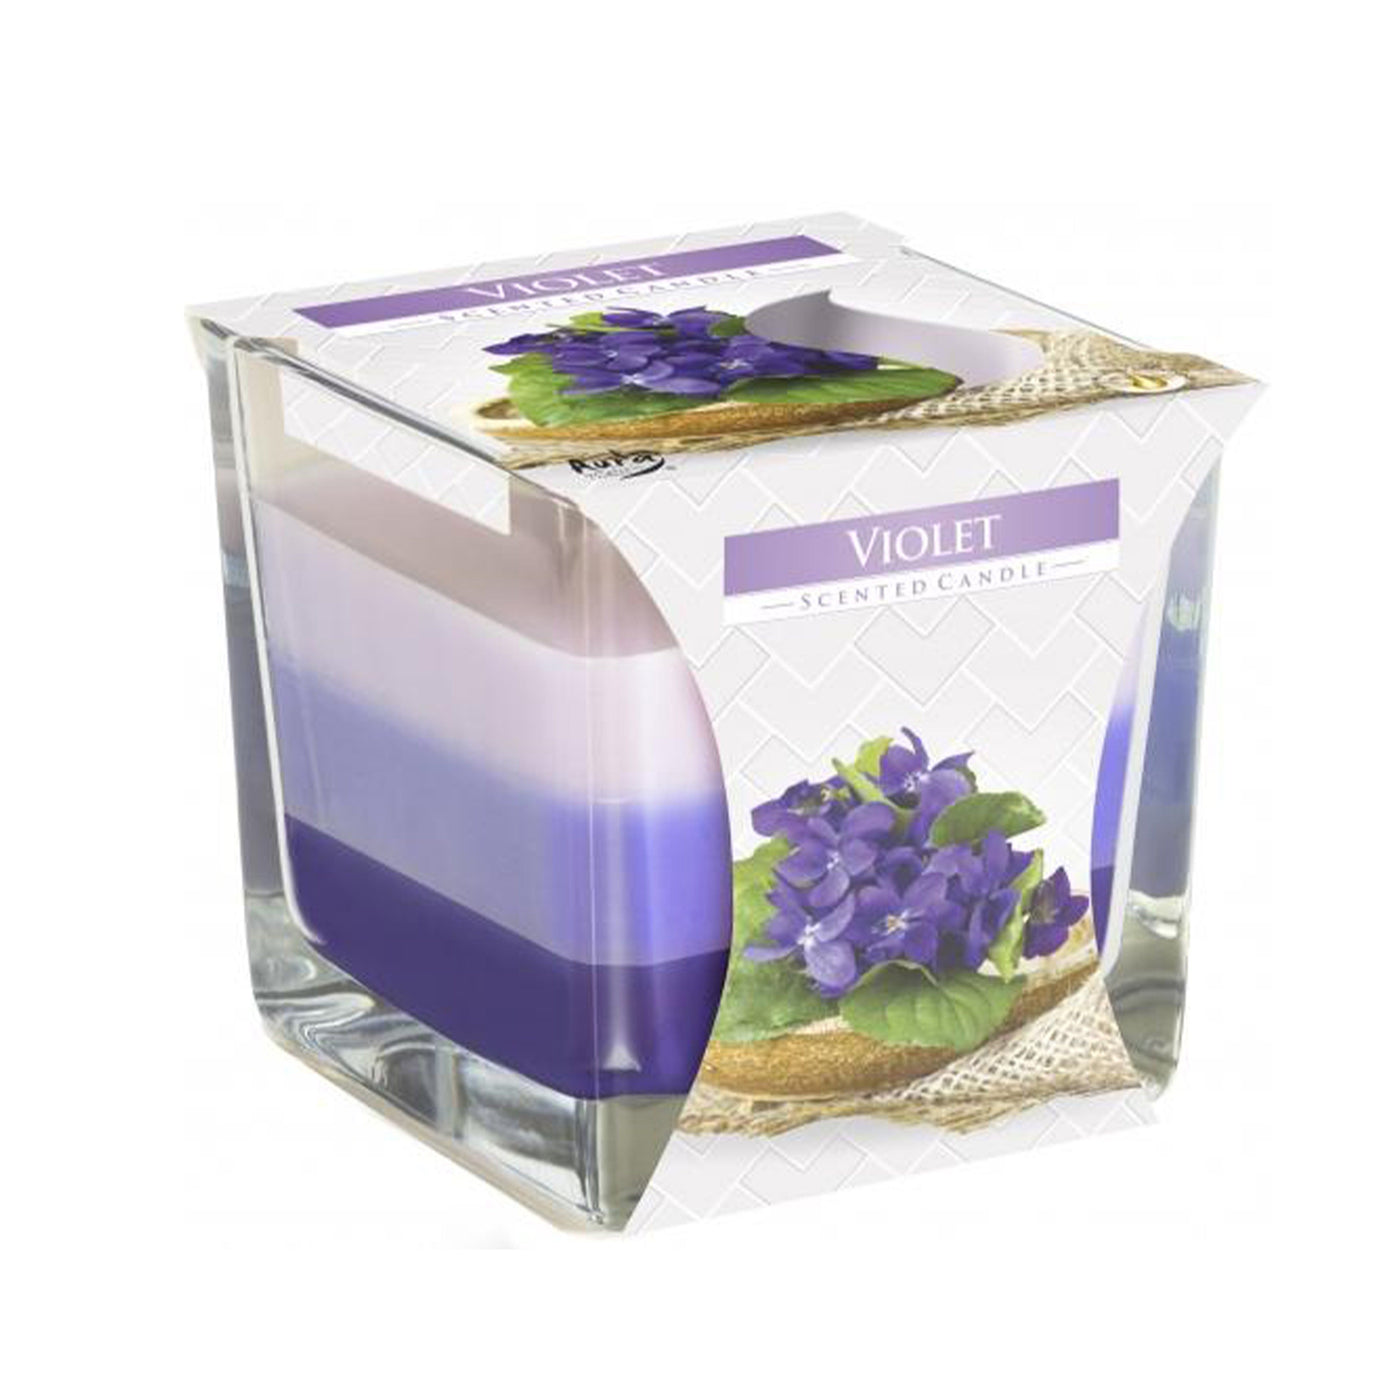 Rainbow Jar Candle - Violet.  A lovely rainbow gift to brighten up your day.   Weight: 570 grams  Burning time: 2 hours  Height: 8,0 cm  Diameter: 8,0 cm  Made in Poland  from paraffin wax.  NB: Please read label before use.